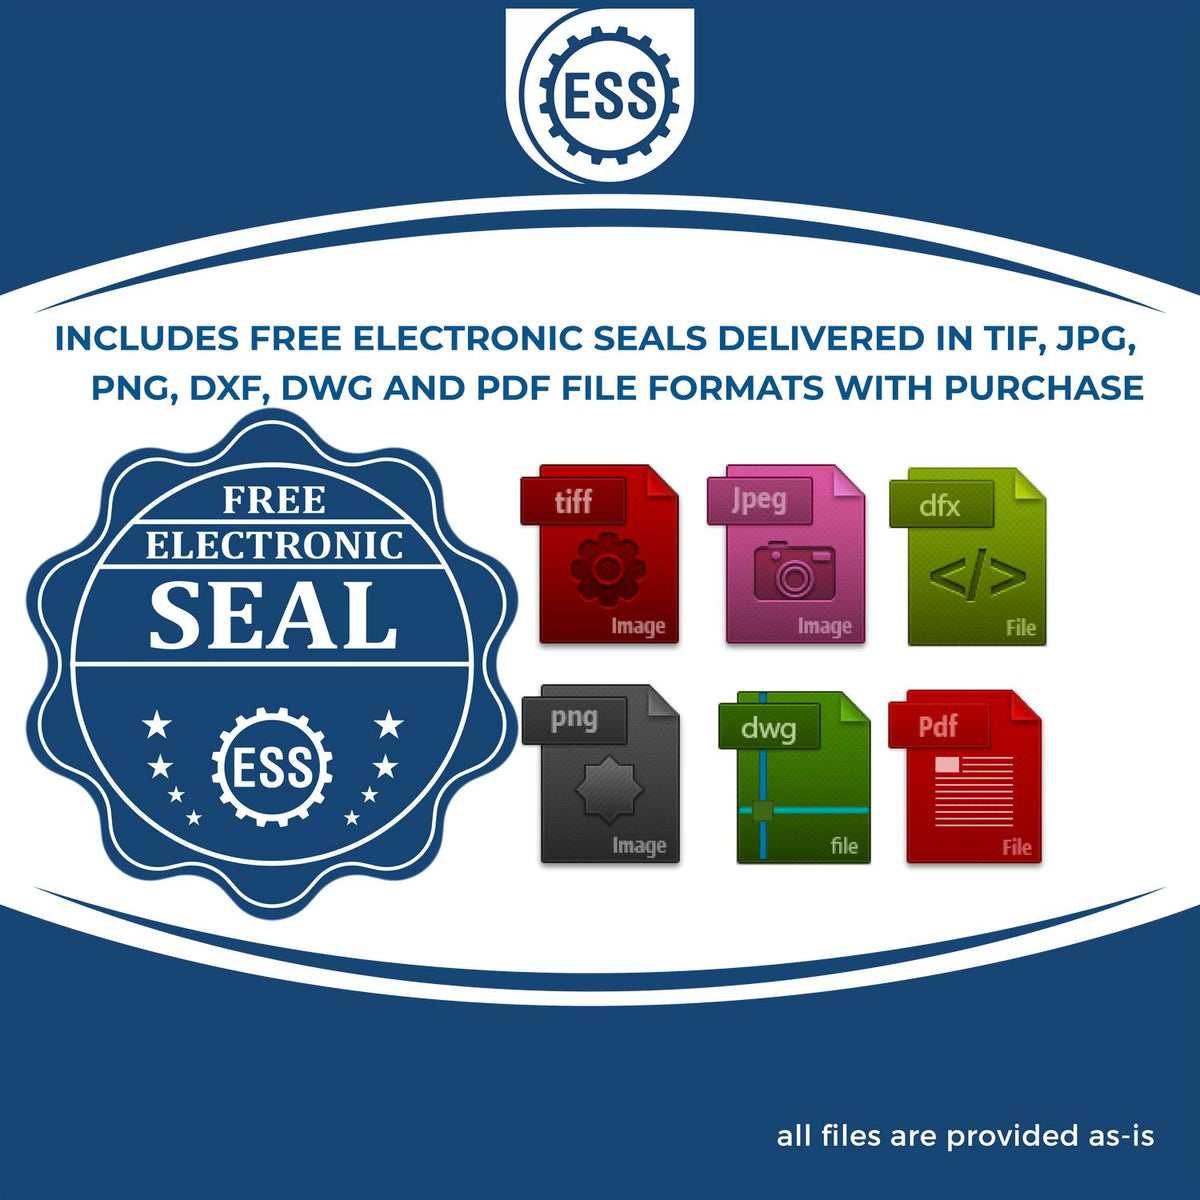 An infographic for the free electronic seal for the State of California Extended Long Reach Engineer Seal illustrating the different file type icons such as DXF, DWG, TIF, JPG and PNG.